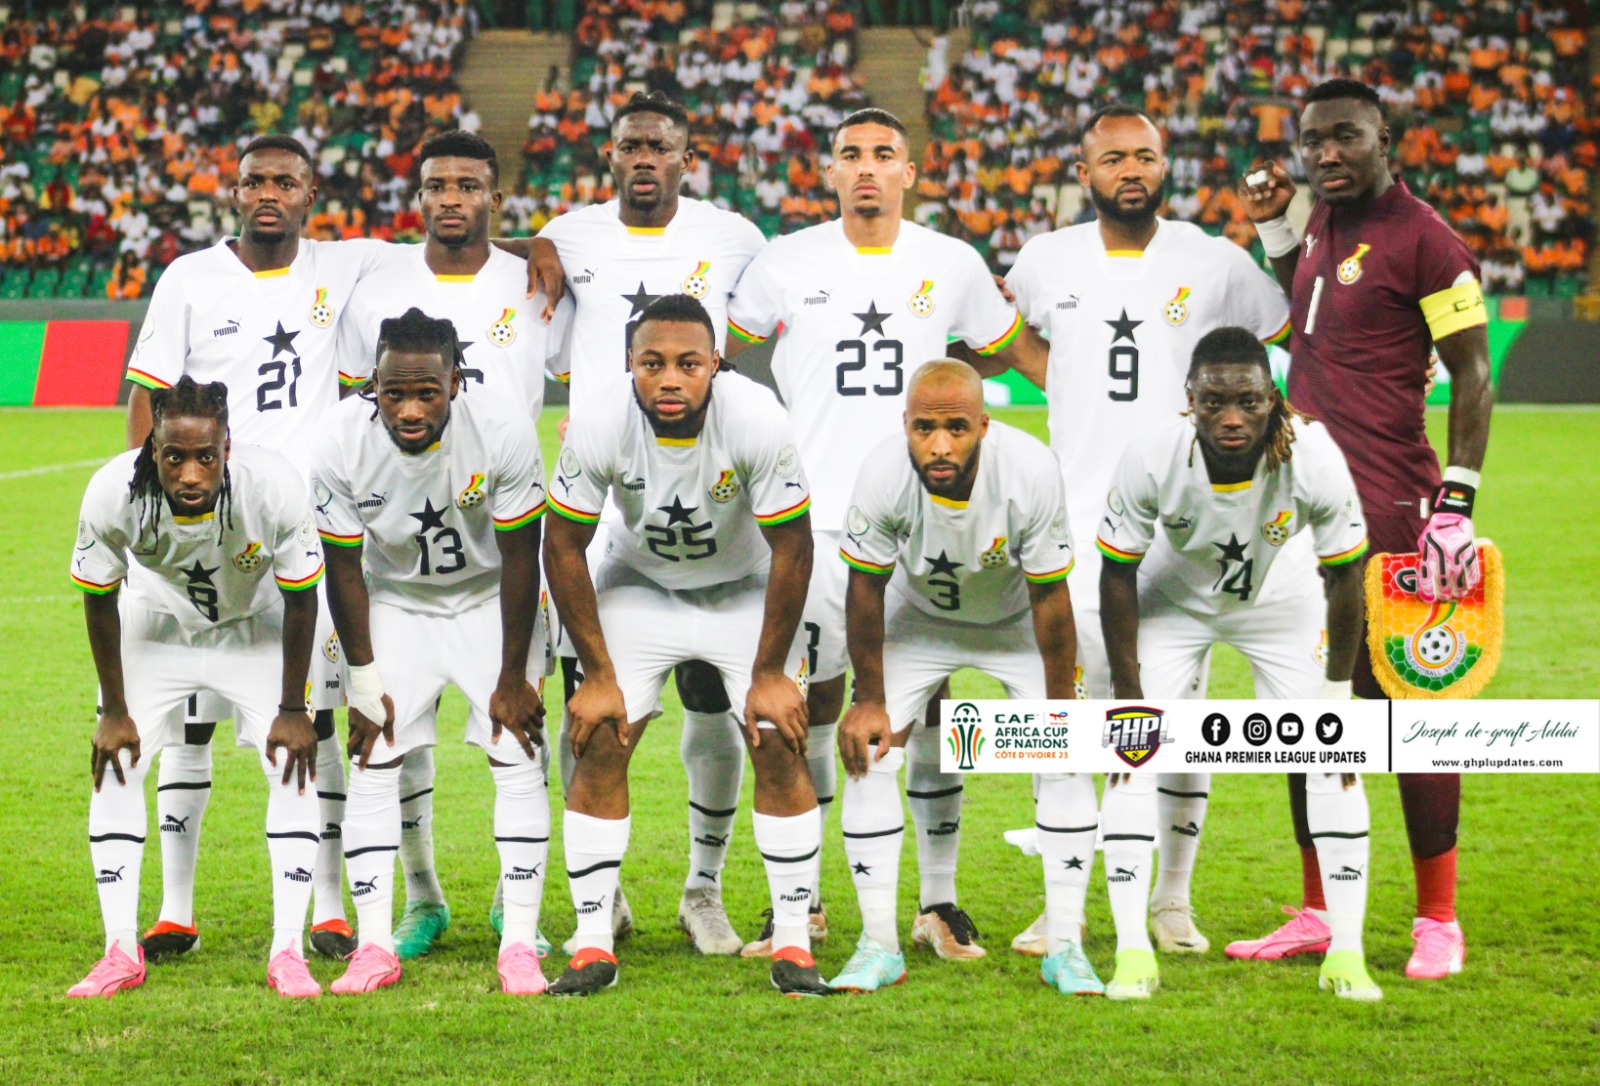 2026 World Cup Qualifiers: Ghana could play home game against Central African Republic at a neutral grounds - Reports